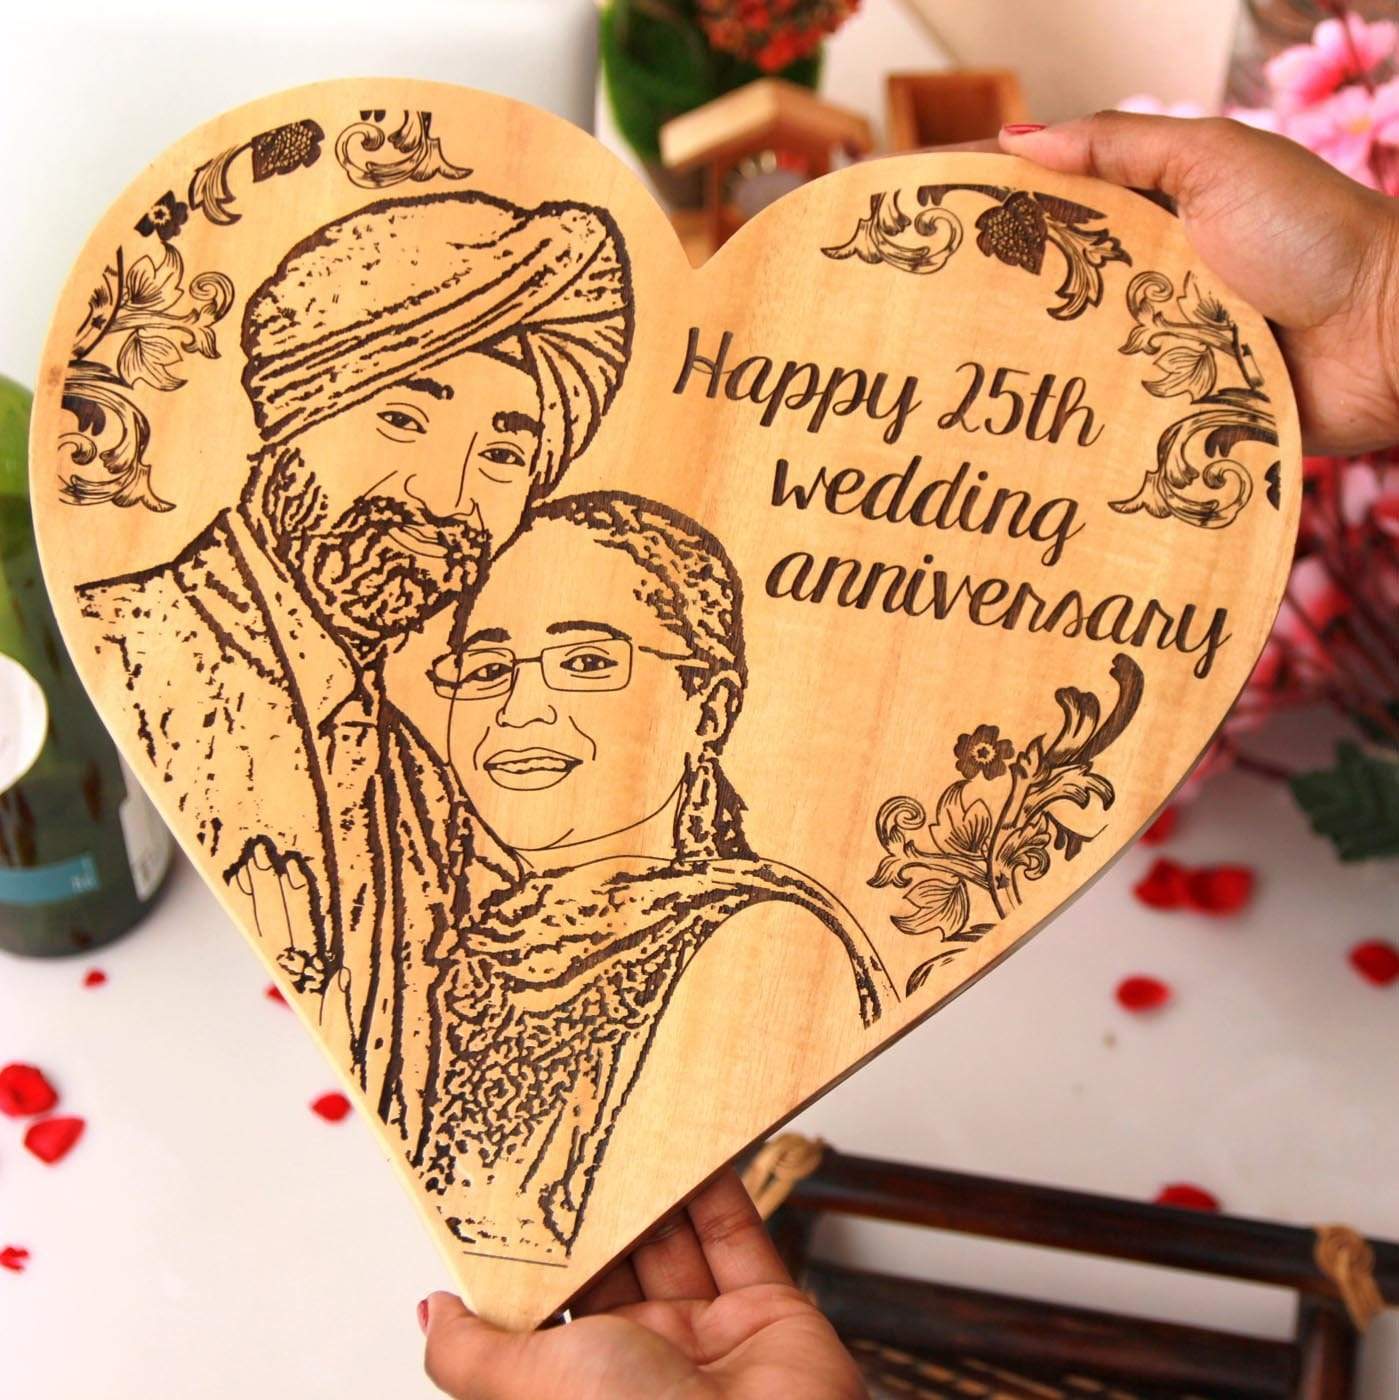 Wood Engraved Photo And Anniversary Wishes On Wooden Plaque. 25th Wedding Anniversary Gifts. 25th anniversary gifts for couples. 25th anniversary gifts for parents. 25th wedding anniversary gift ideas for indian couples.